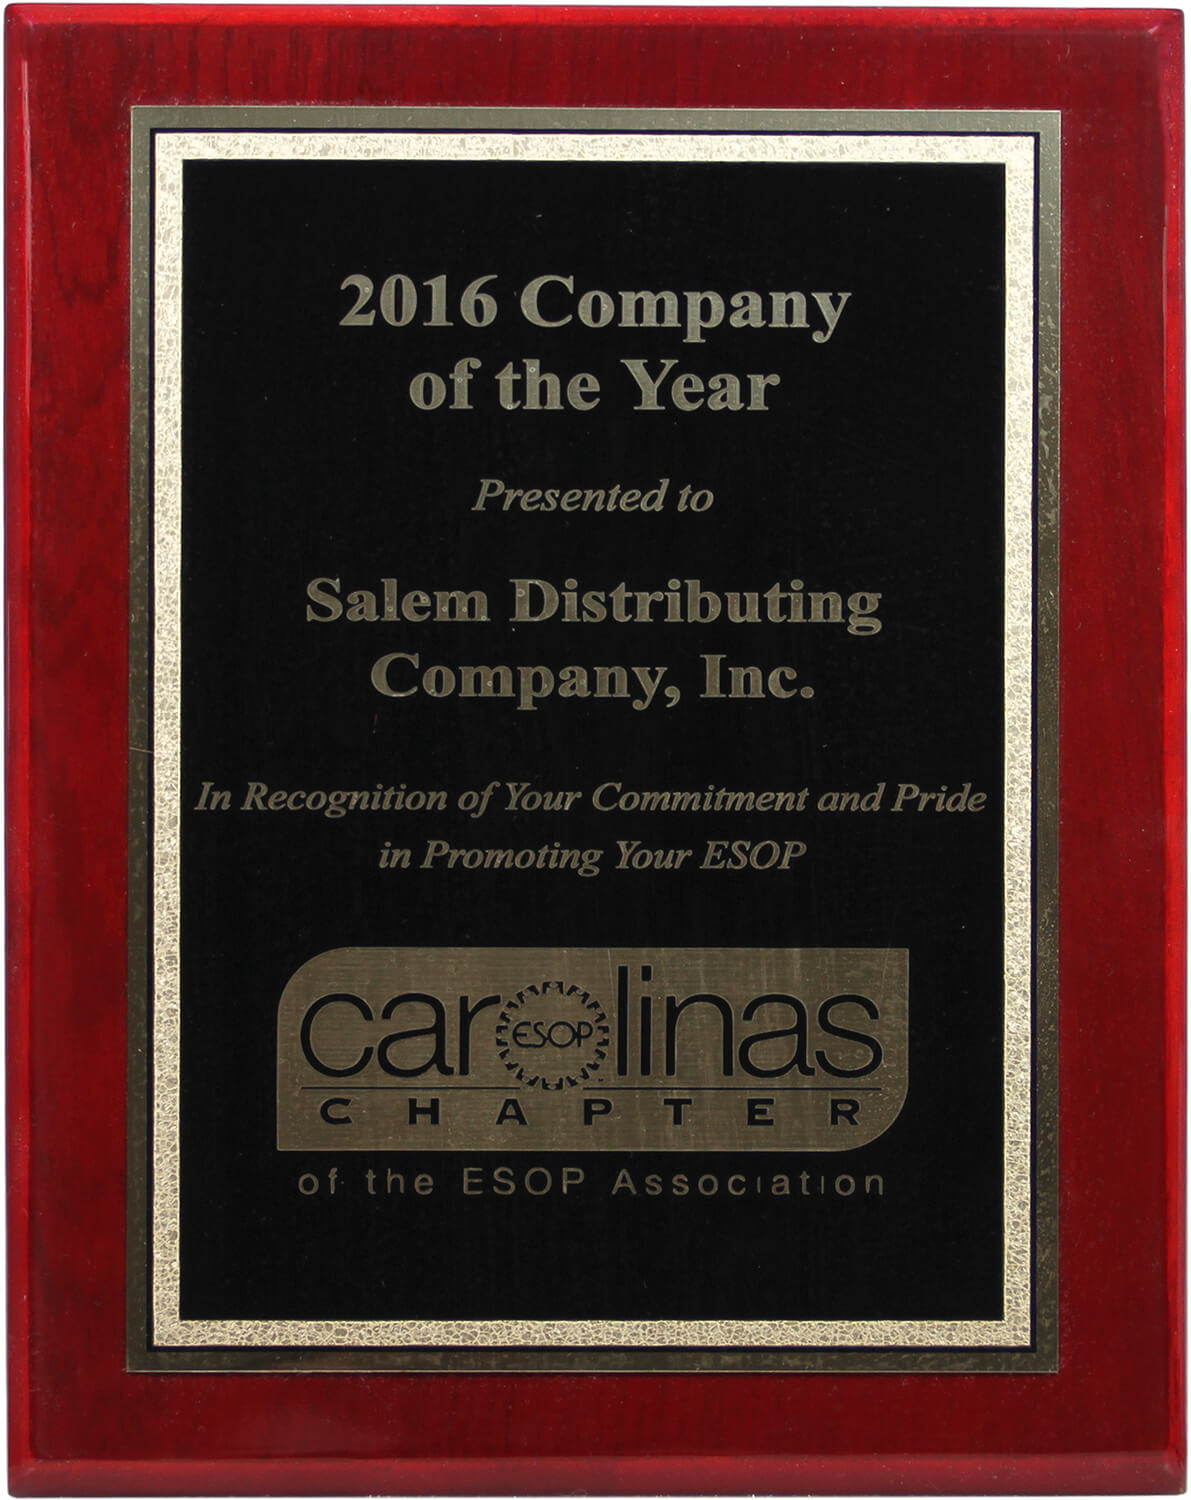 ESOP Company of the Year 2016